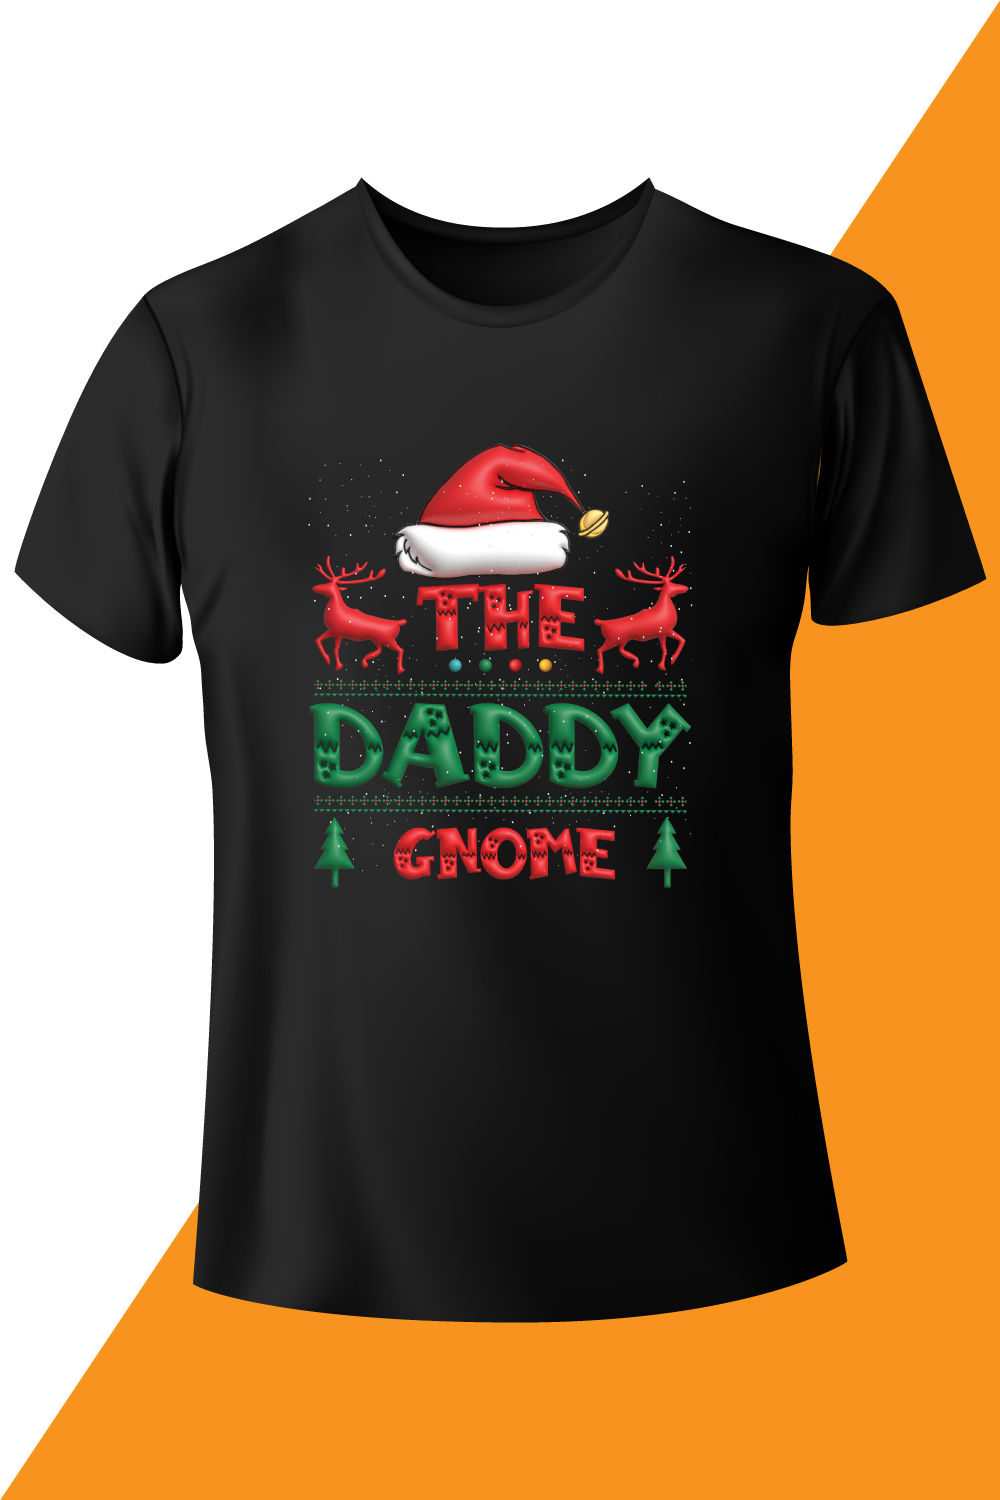 Image of a black t-shirt with a great slogan The daddy gnome.